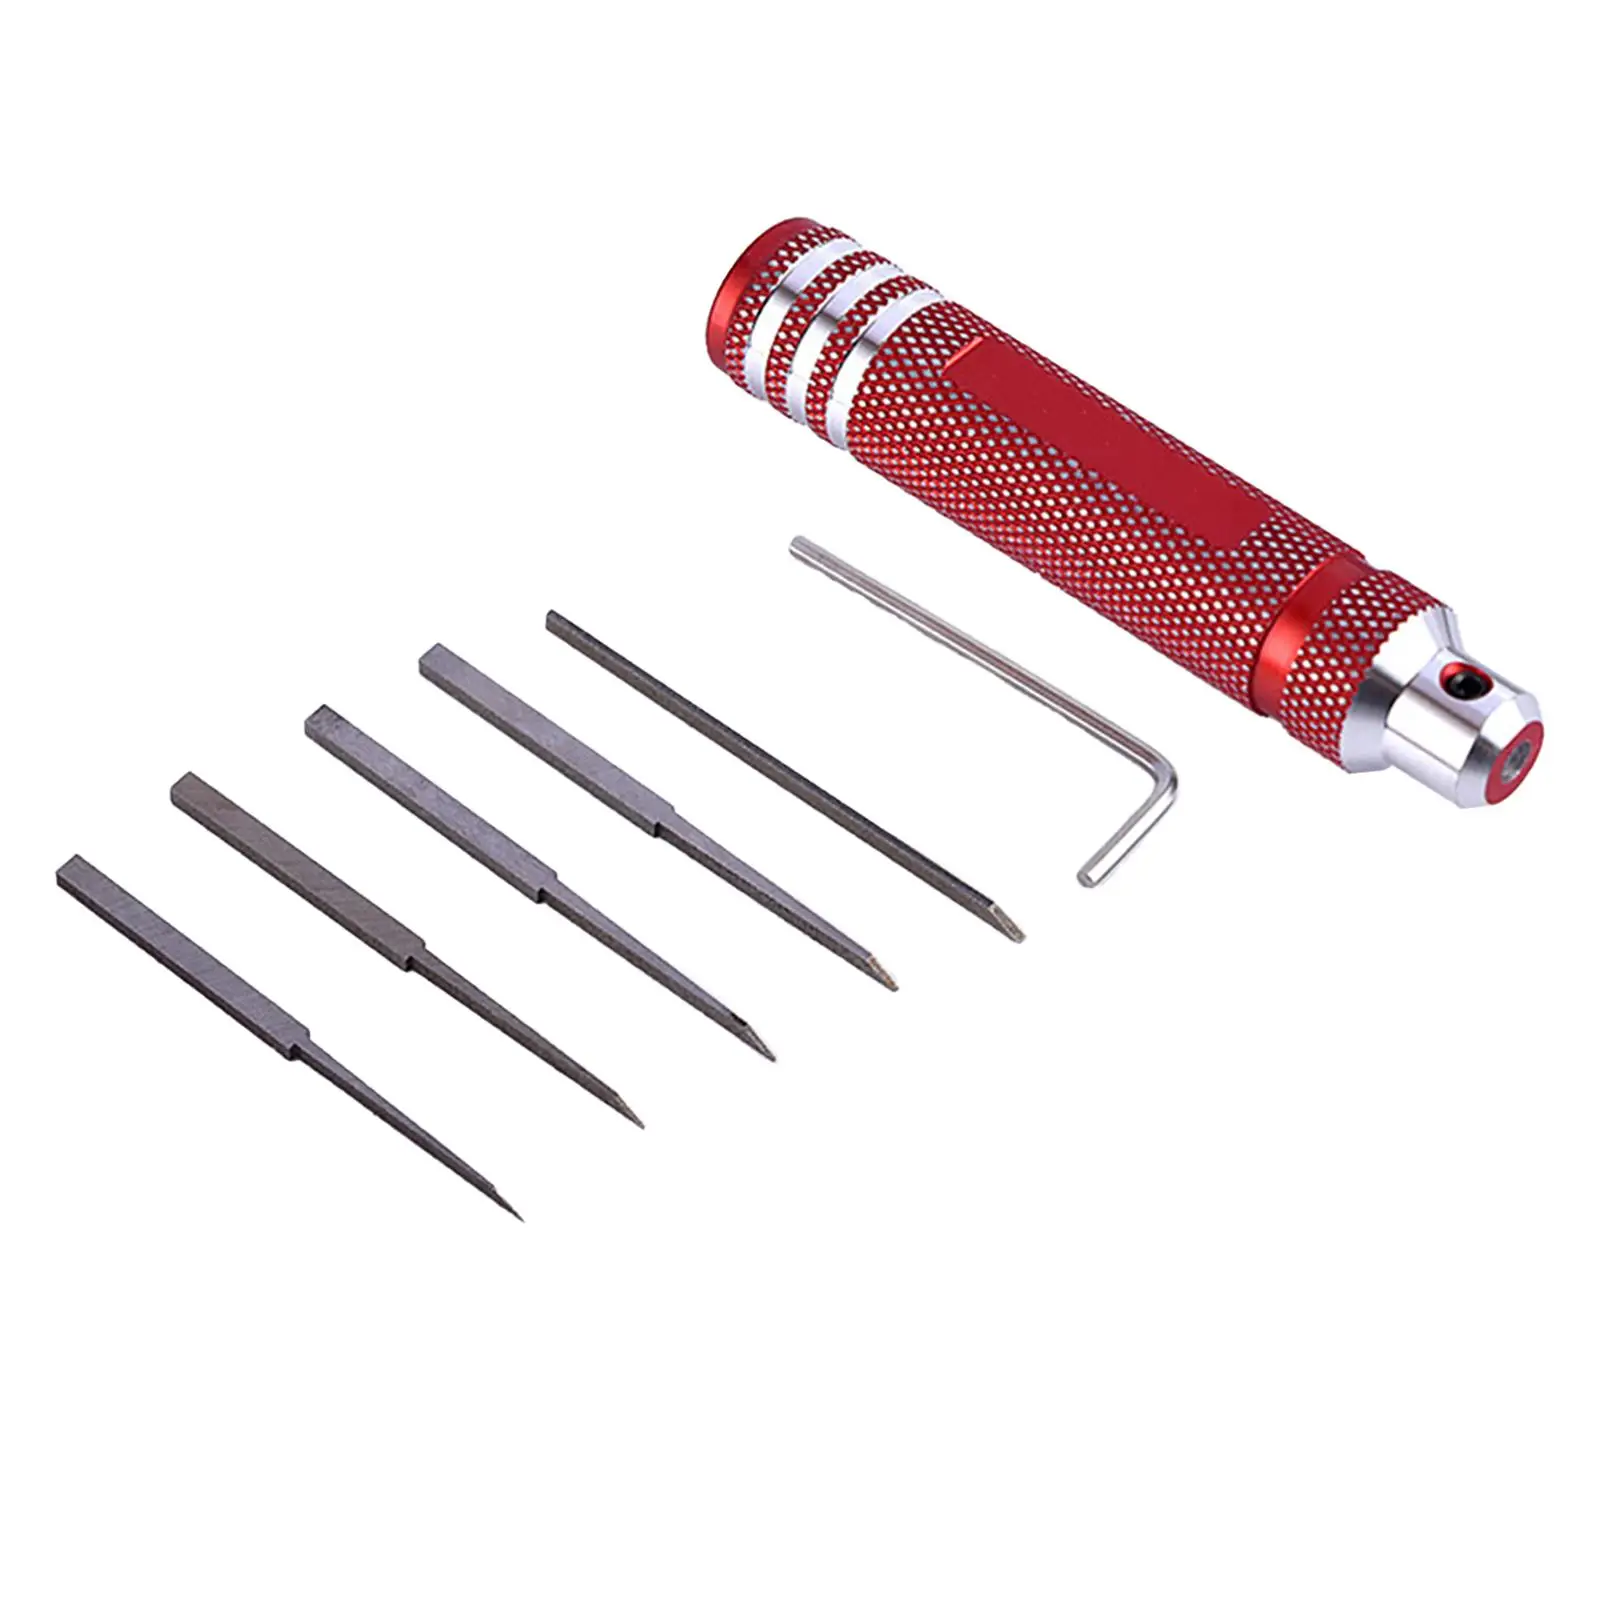 Model Scriber Tool Scriber Trimmer Precision Replacement Carving Knife for Clay Sculpture Pottery Modeling Resin Carved Carving